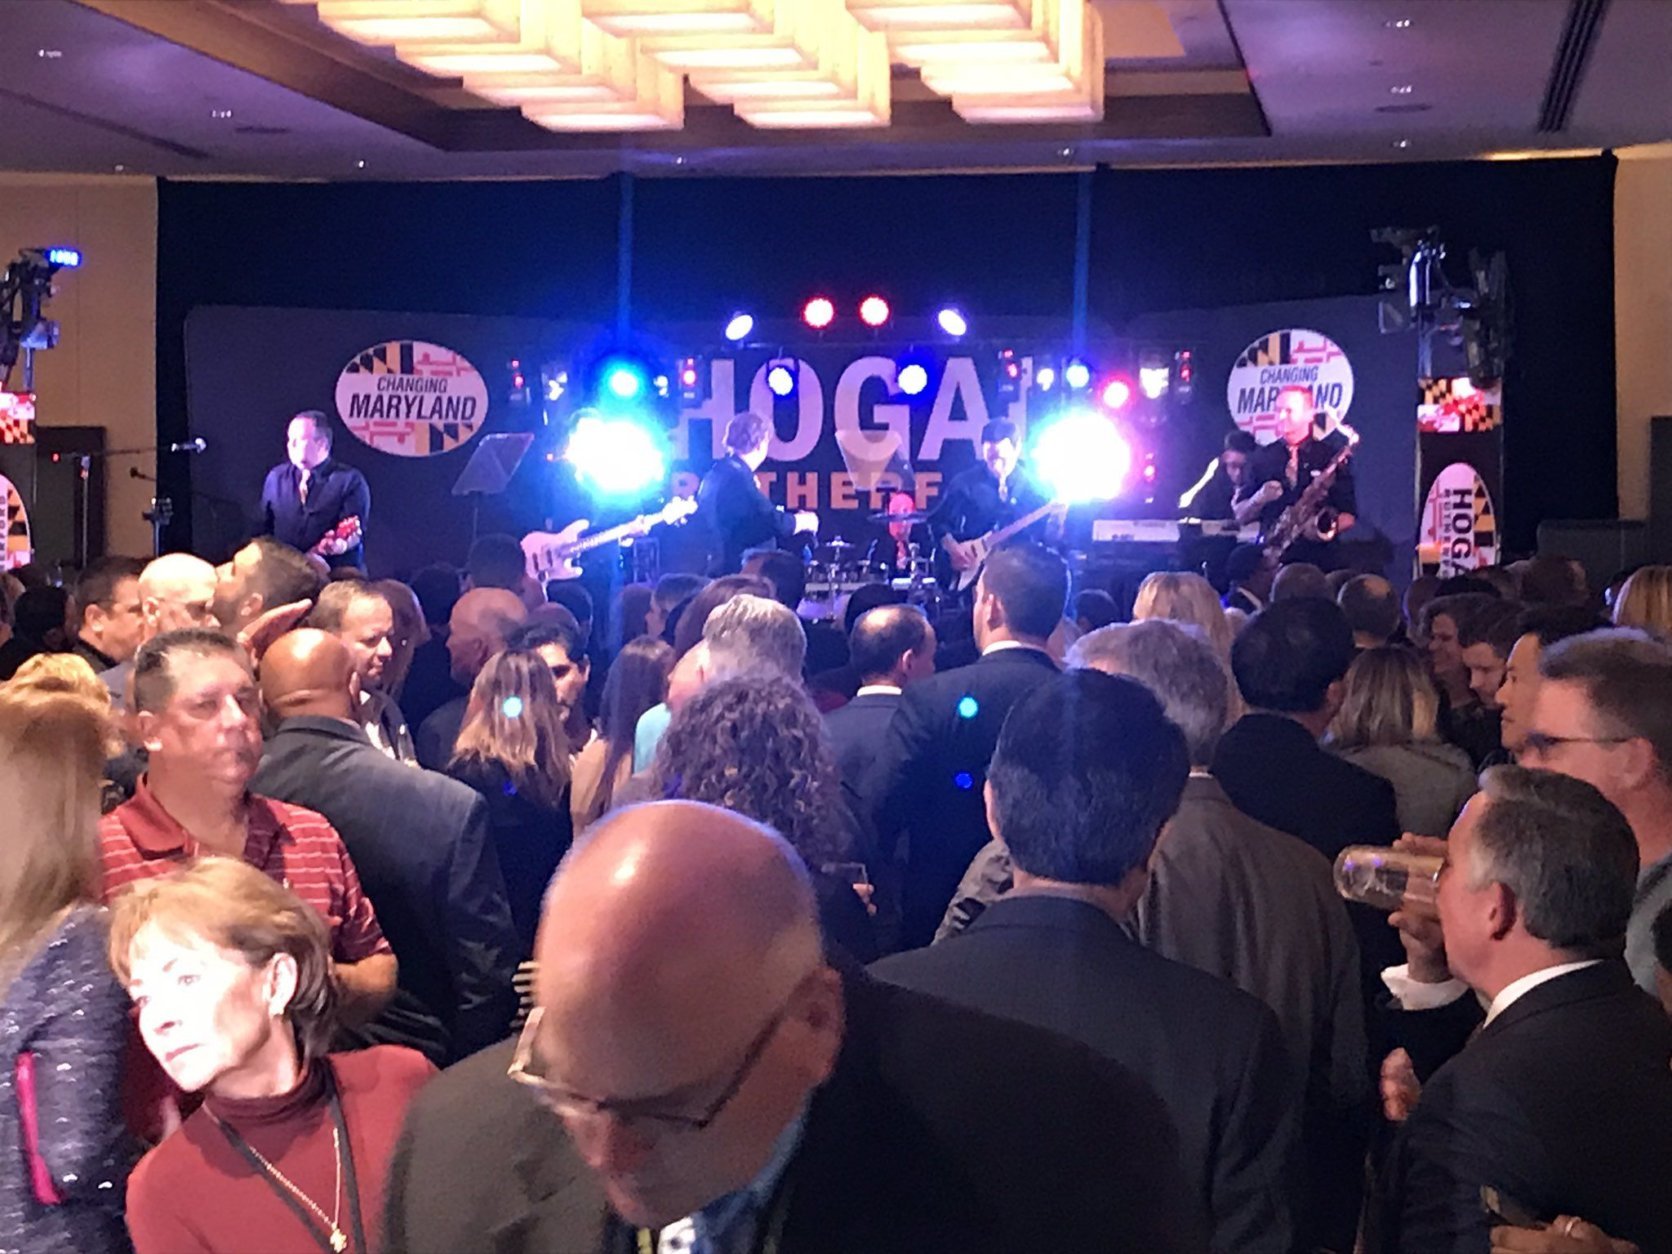 The band was playing again at Hogan’s re-election party Tuesday night “until things are official.” (WTOP/Michelle Basch)